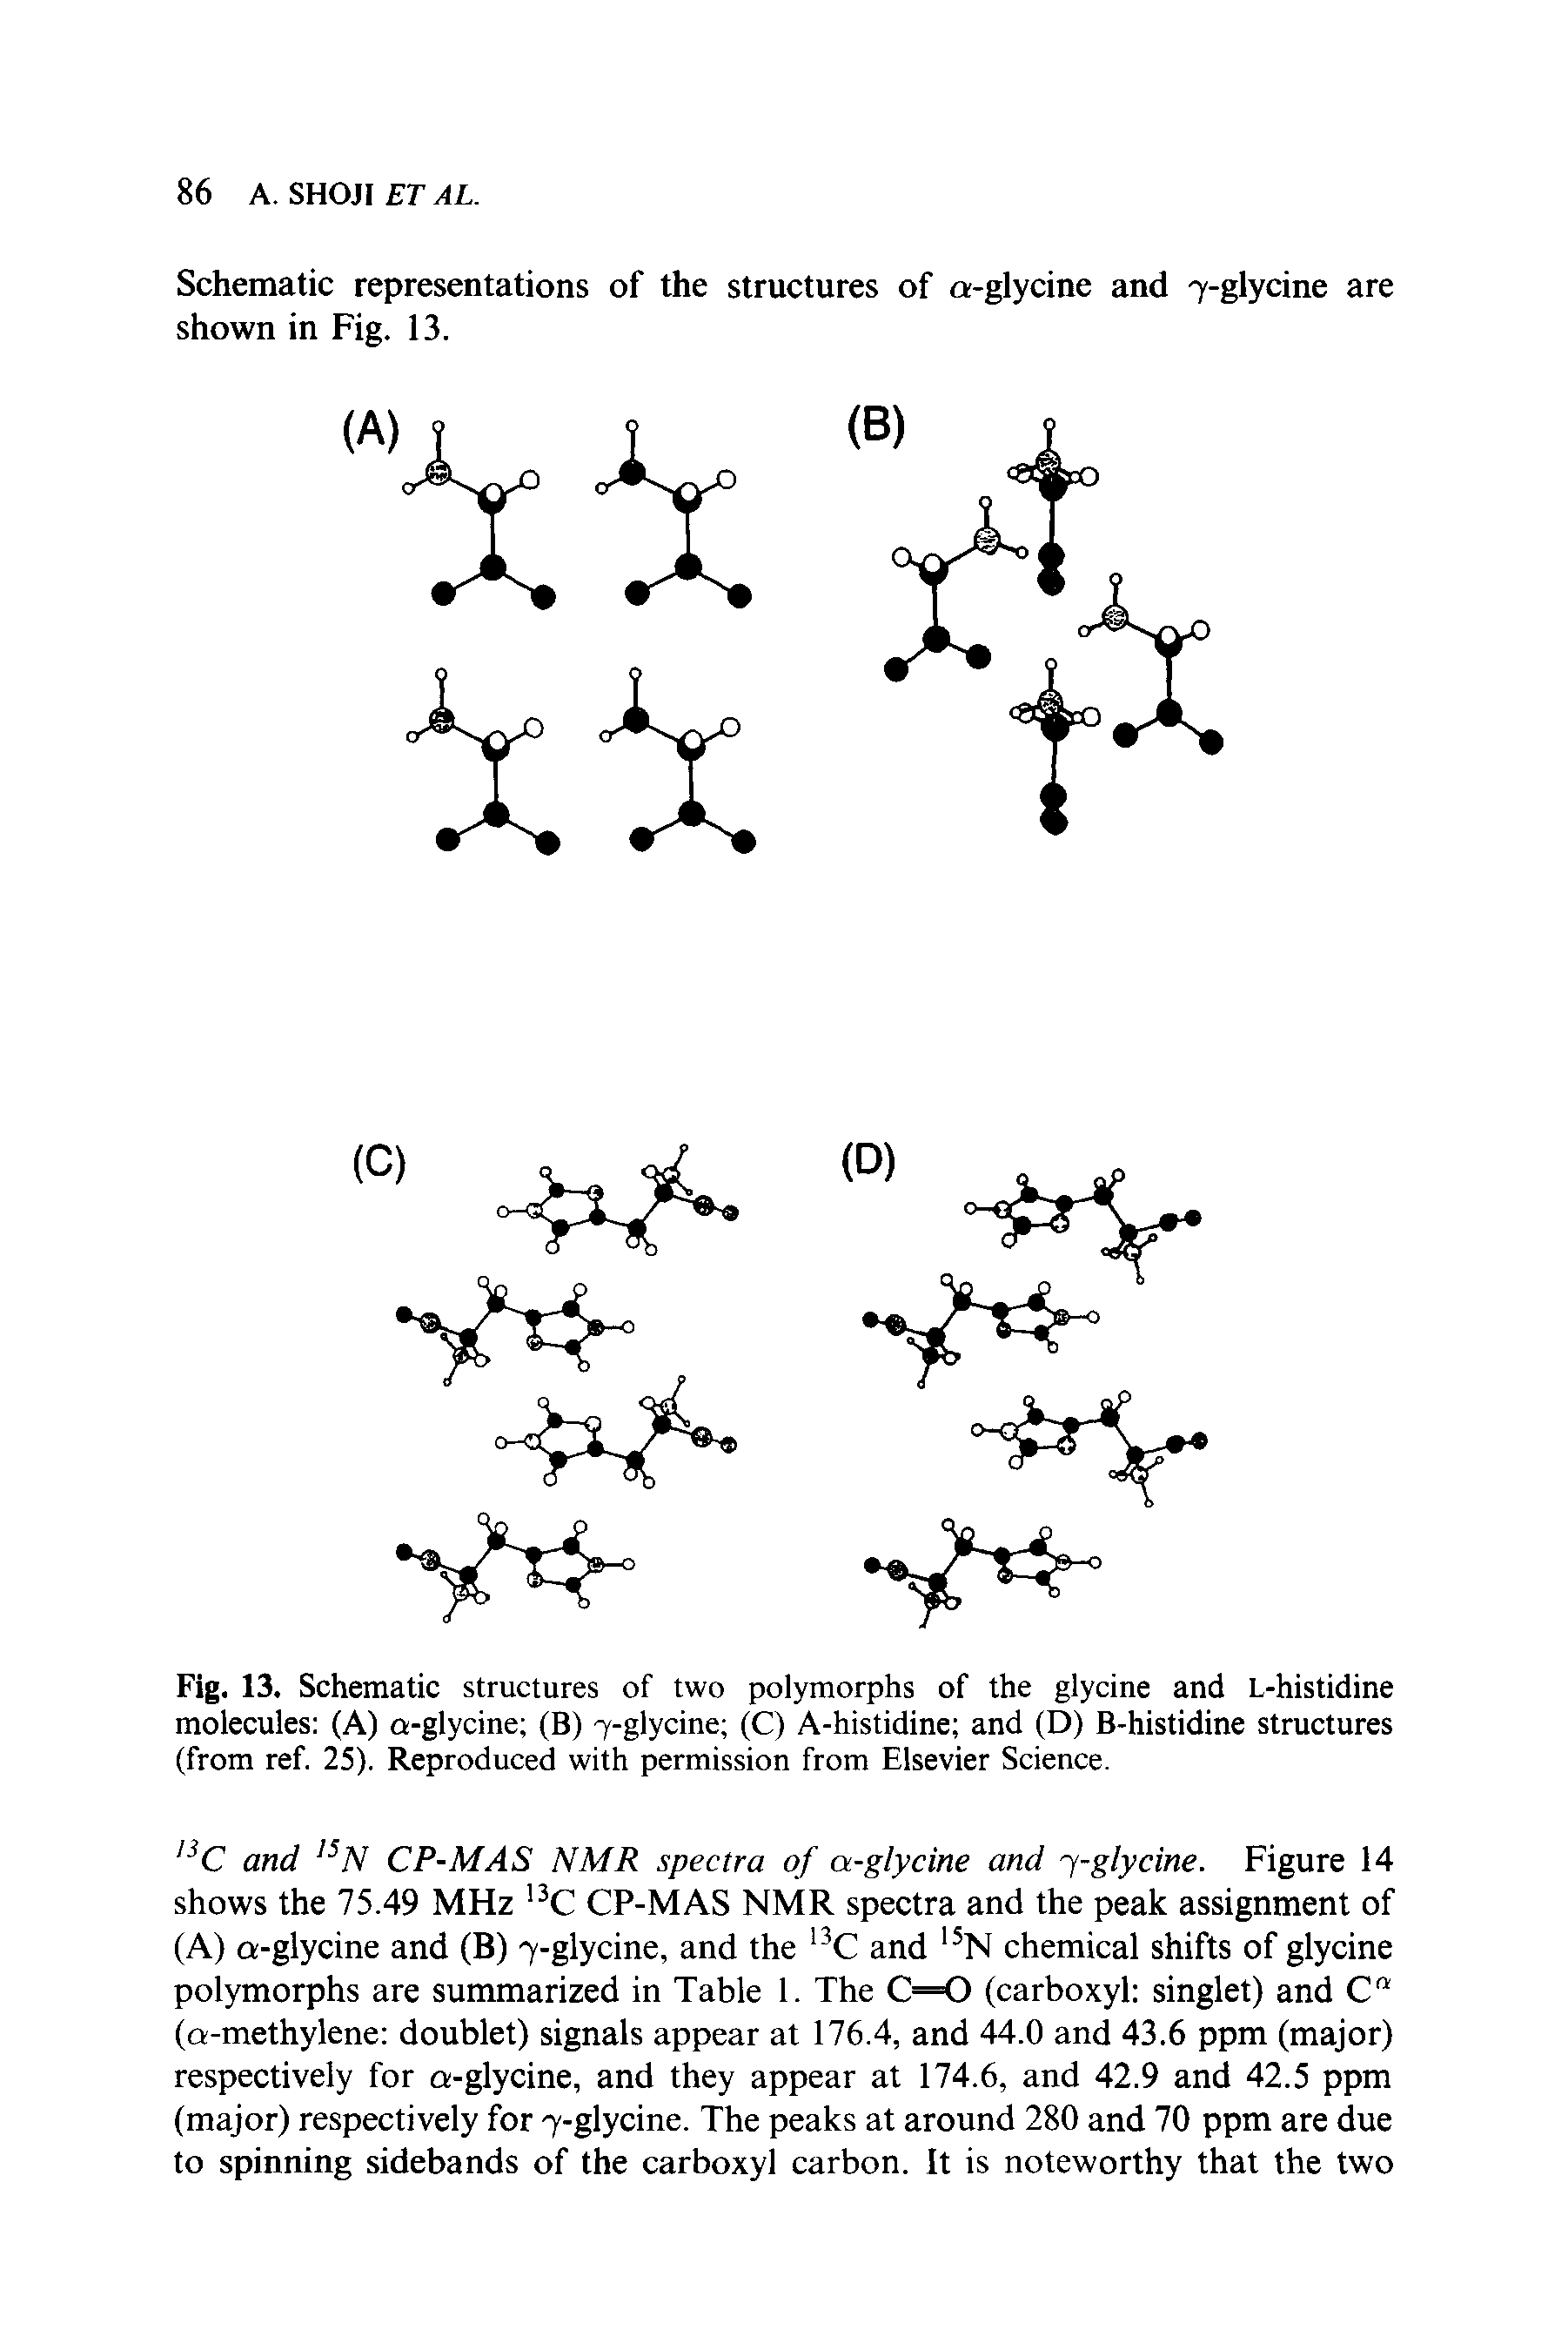 Fig. 13. Schematic structures of two polymorphs of the glycine and L-histidine molecules (A) o-glycine (B) - -glycine (C) A-histidine and (D) B-histidine structures (from ref. 25). Reproduced with permission from Elsevier Science.